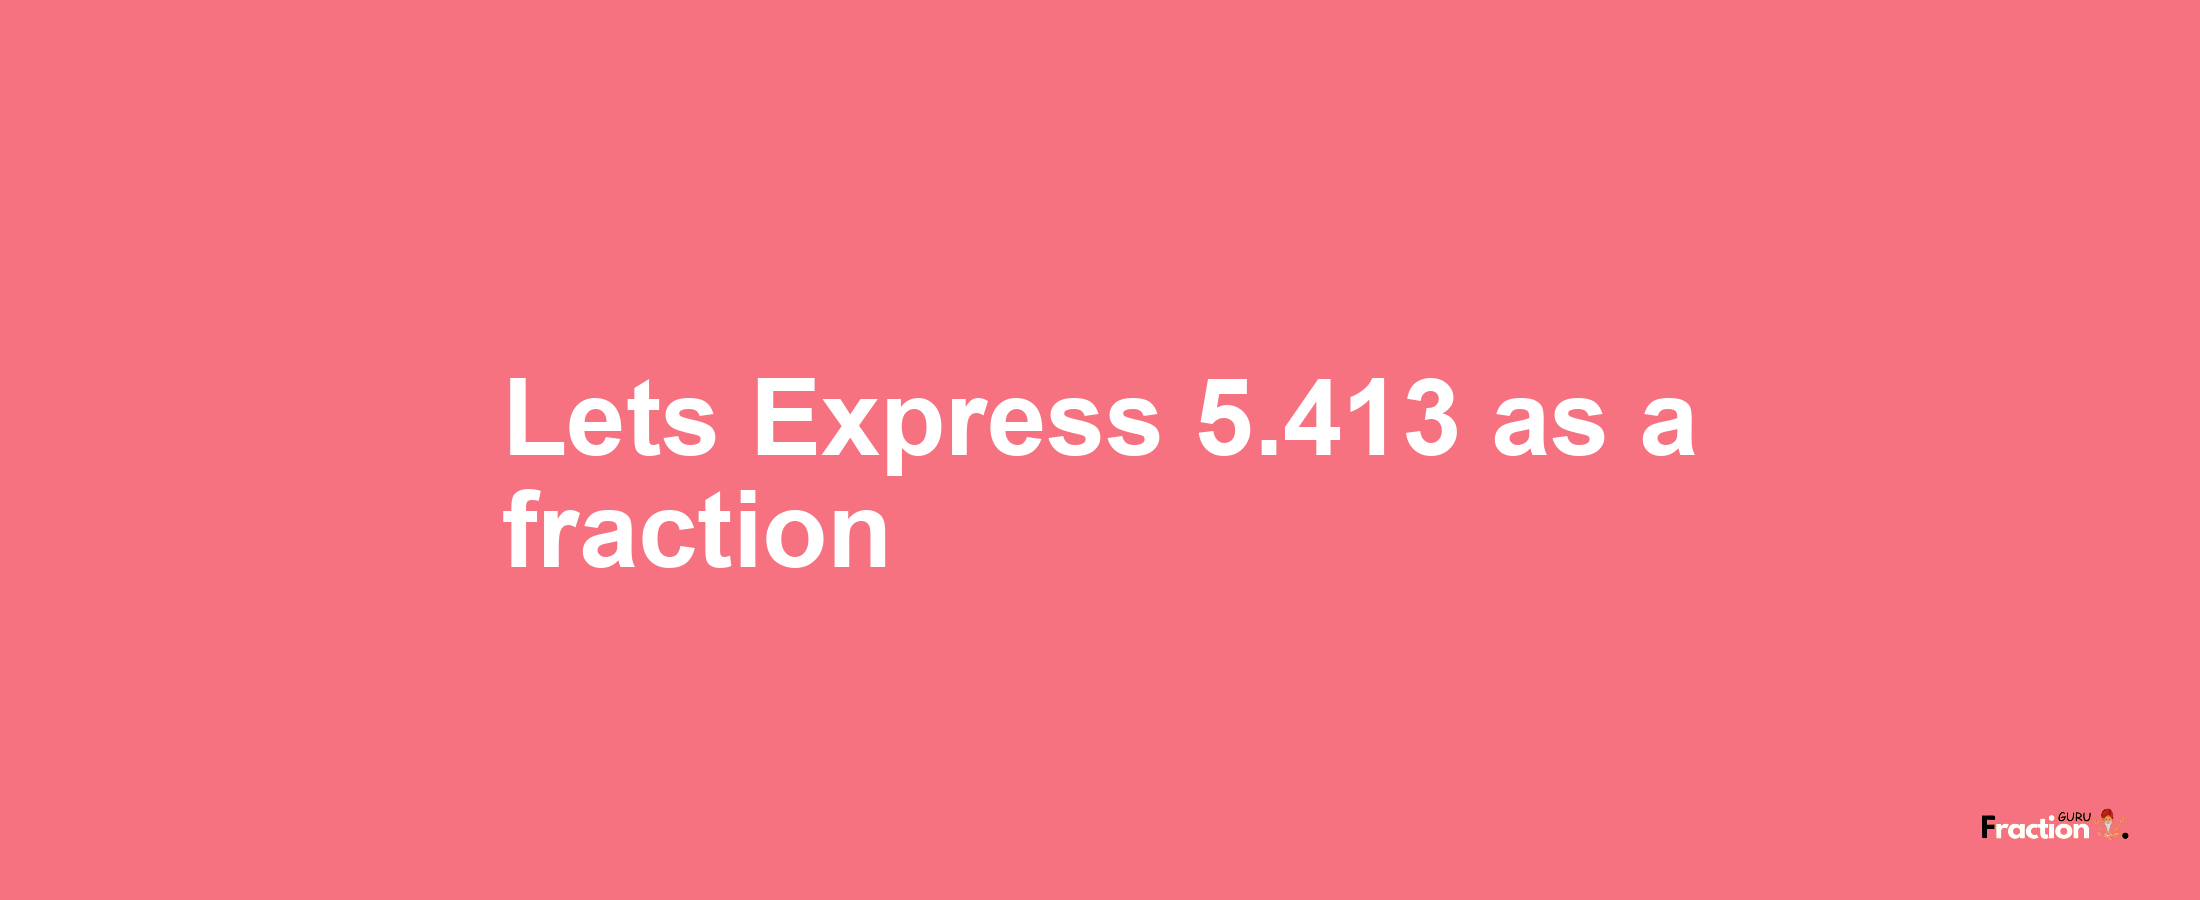 Lets Express 5.413 as afraction